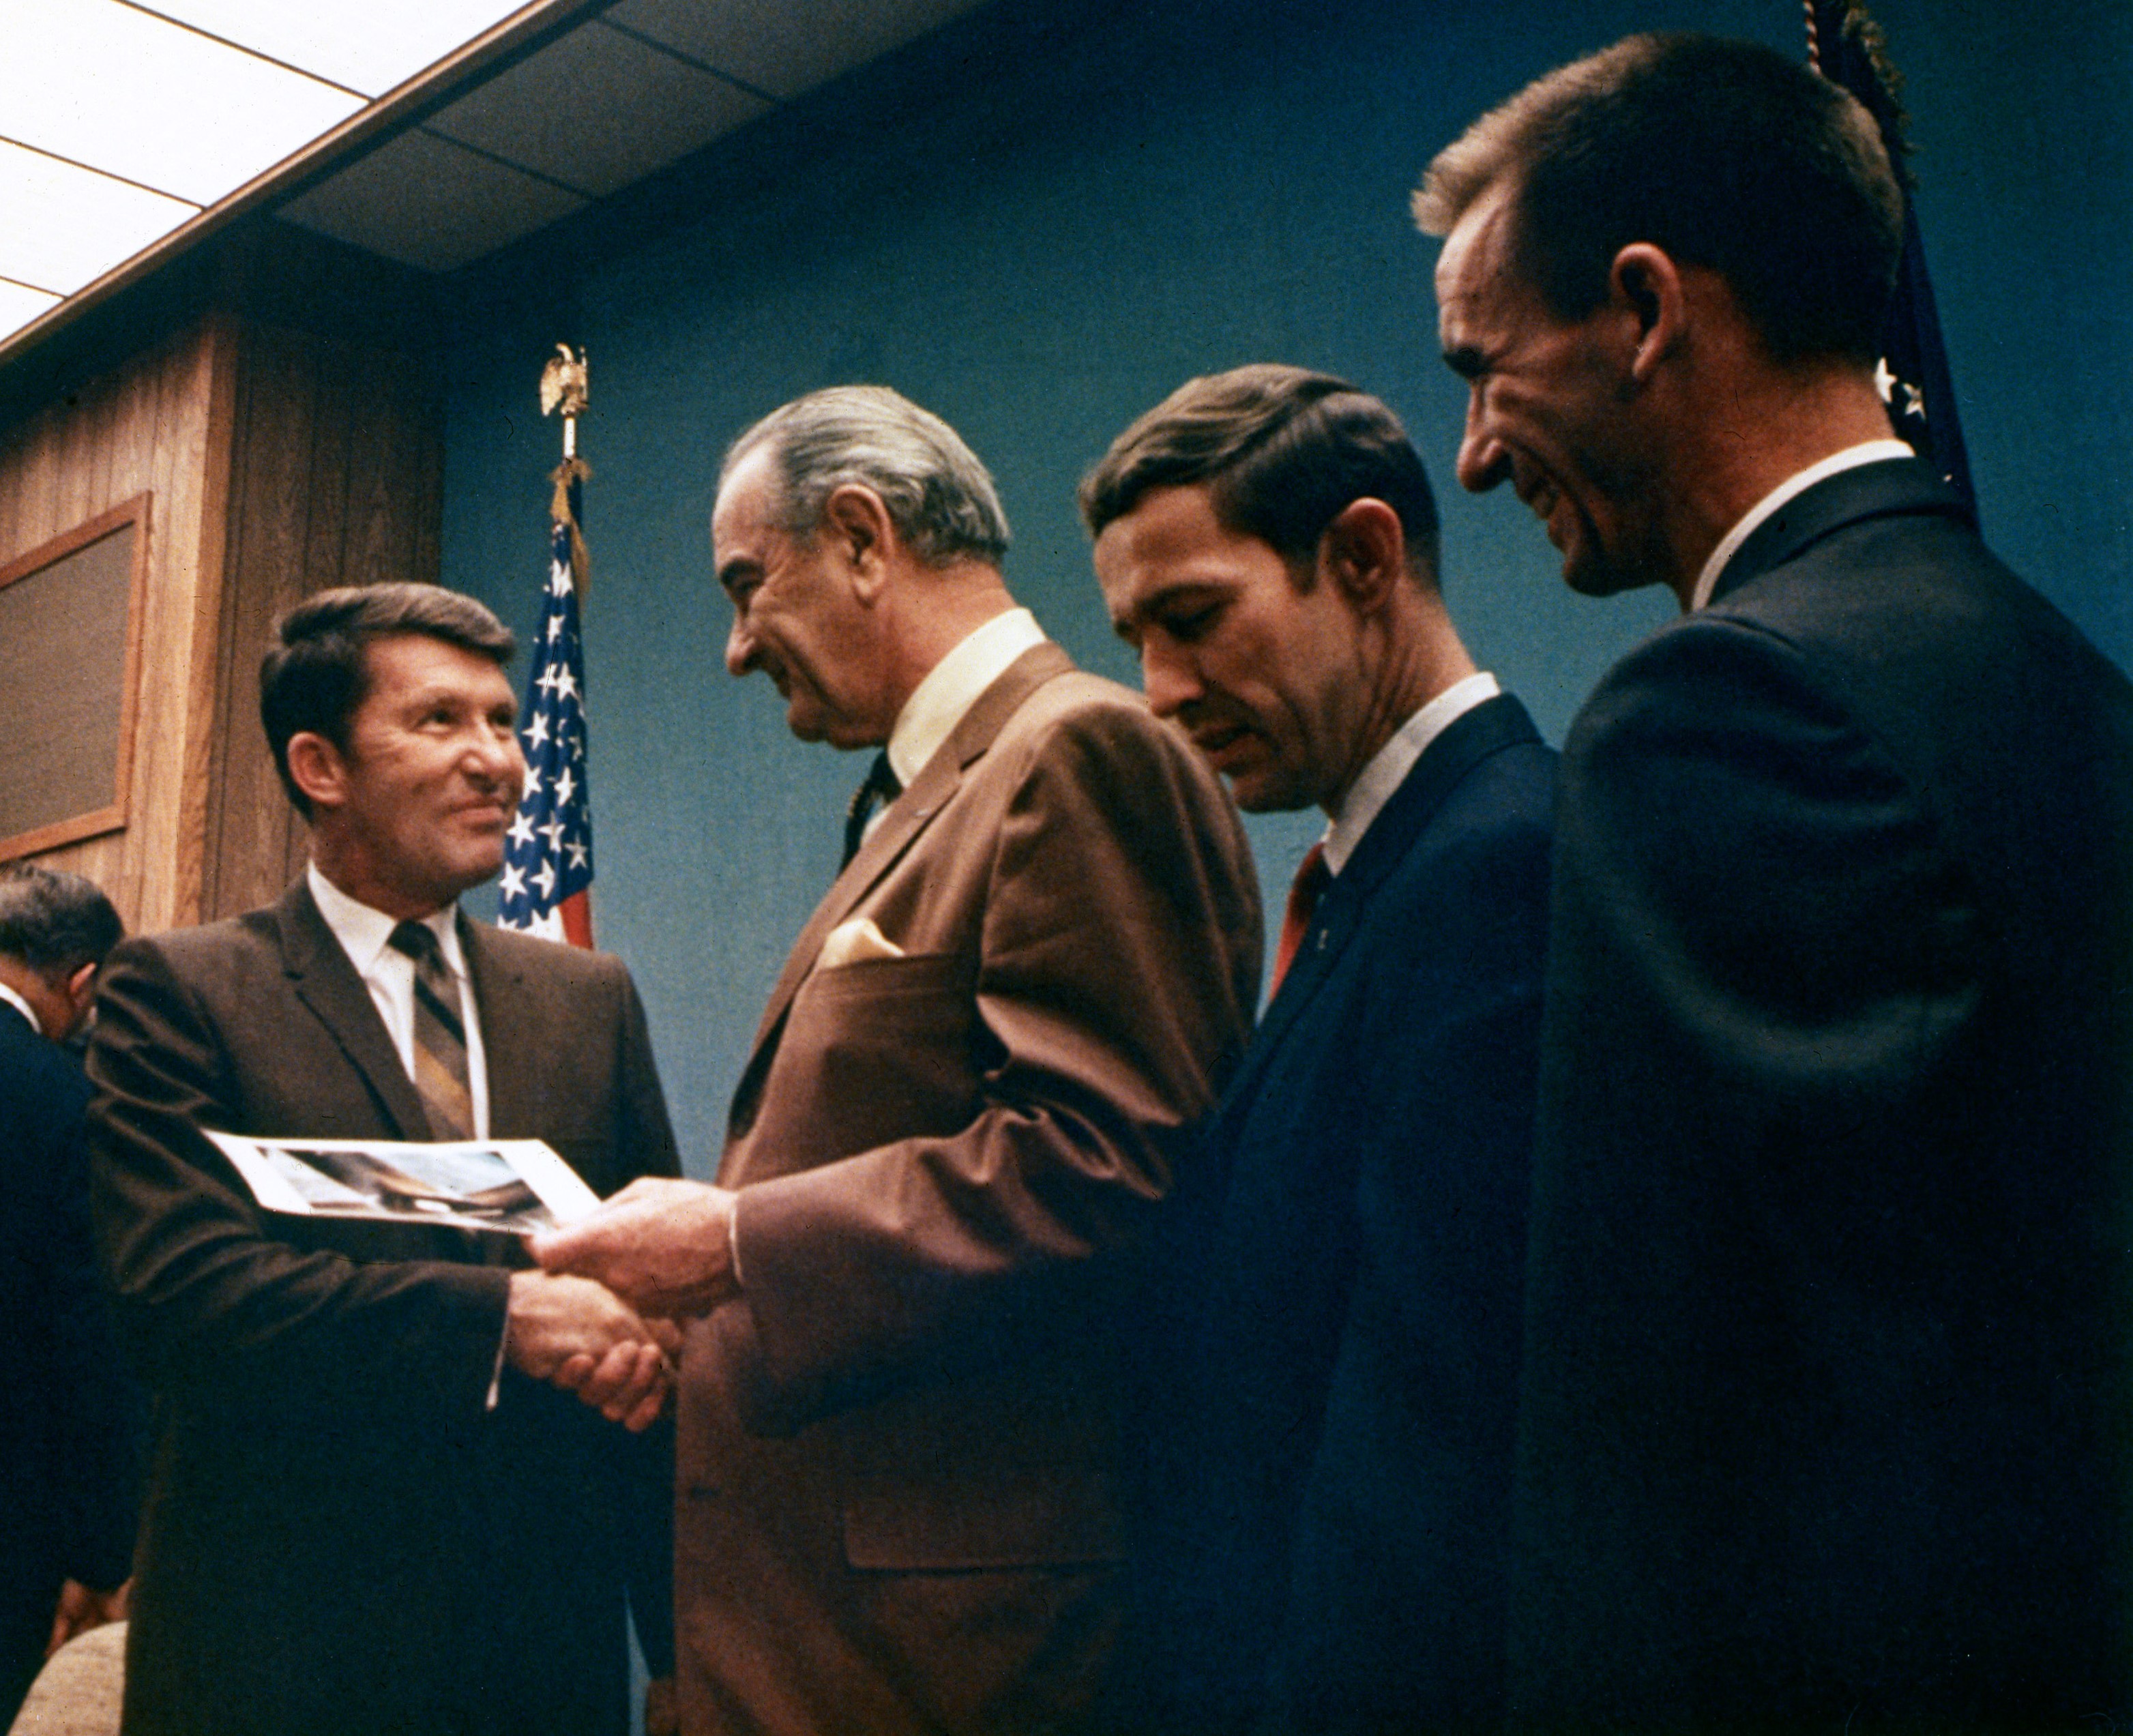 Image of President Lyndon B. Johnson, second from left, presents Apollo 7 astronauts Walter M. Schirra, left, Donn F. Eisele, and R. Walter Cunningham with Exceptional Service Medals at the LBJ Ranch